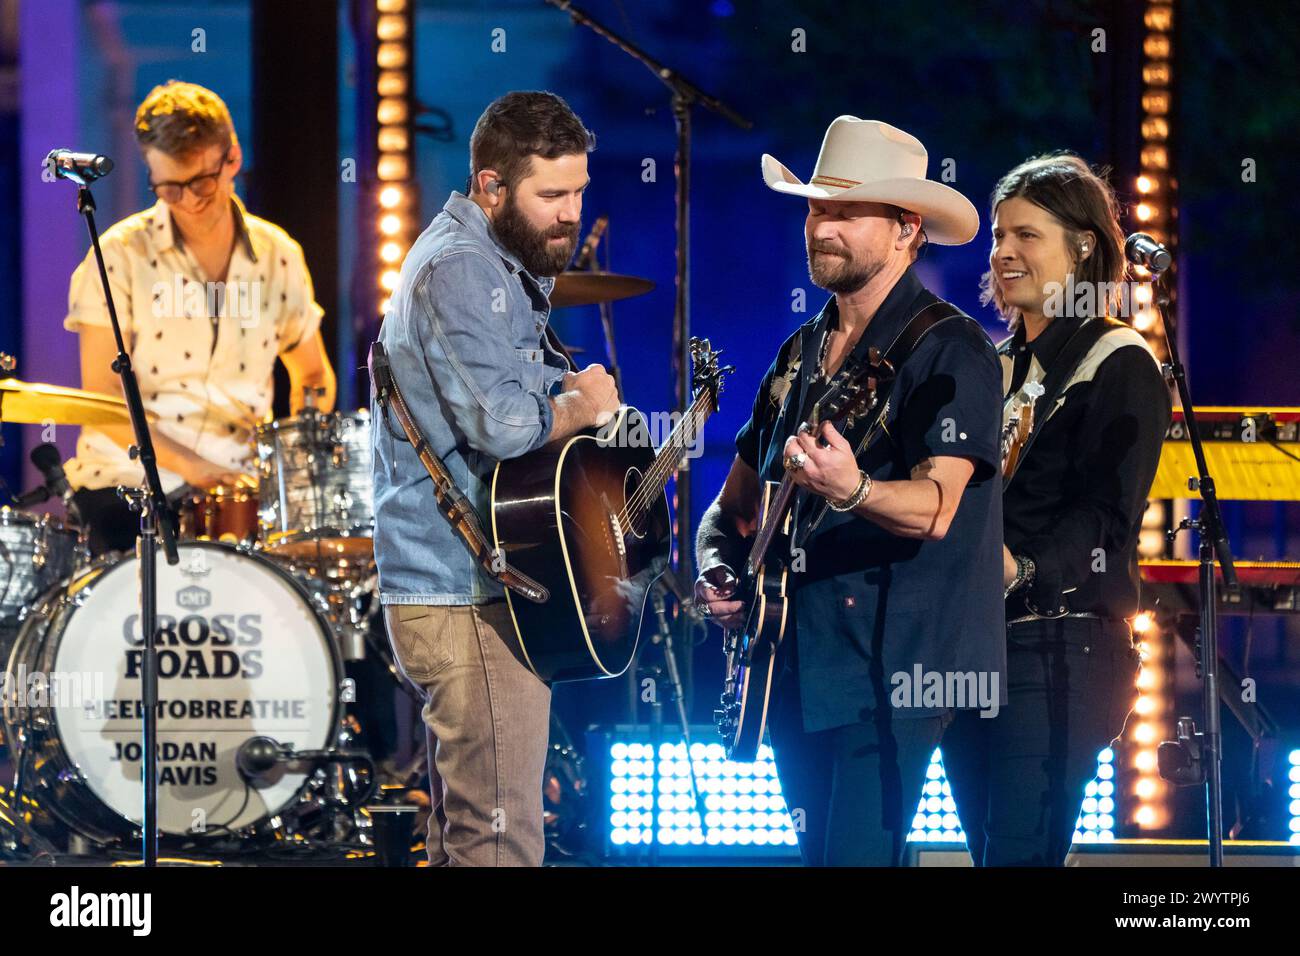 AUSTIN, TEXAS - APRIL 07: In this image released on April 07, 2024, Jordan Davis and Bear Rinehart of NEEDTOBREATHE perform at CMT Crossroads at the University of Texas at Austin on April 5, 2024, aired as part of the CMT Music Awards on April 7, 2024, in Austin, Texas.  (Photo by Amy E. Price/ImageSPACE) Stock Photo